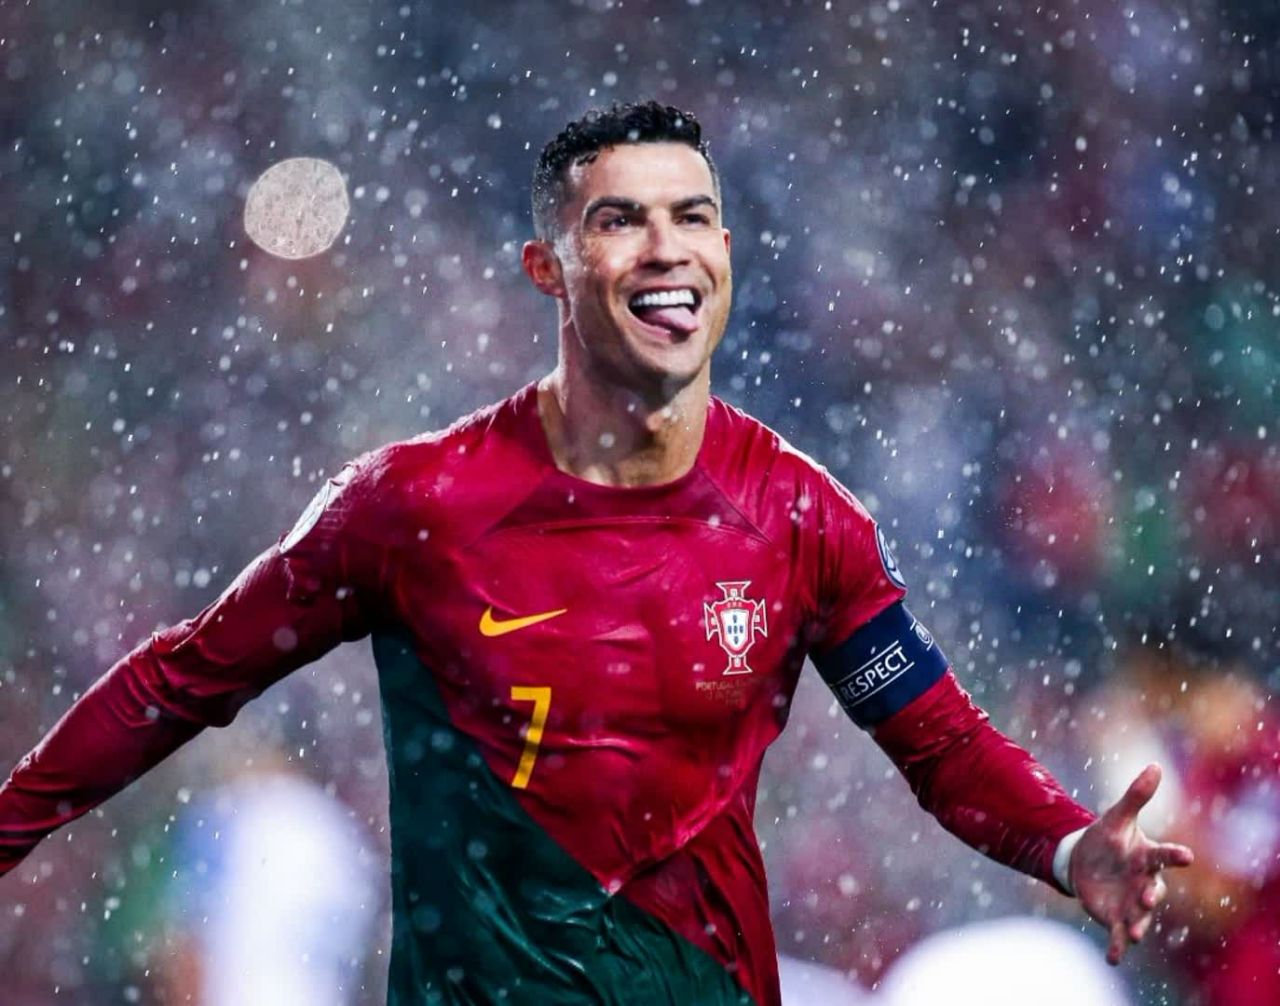 Historical record for Ronaldo; 53 goals at the age of 39